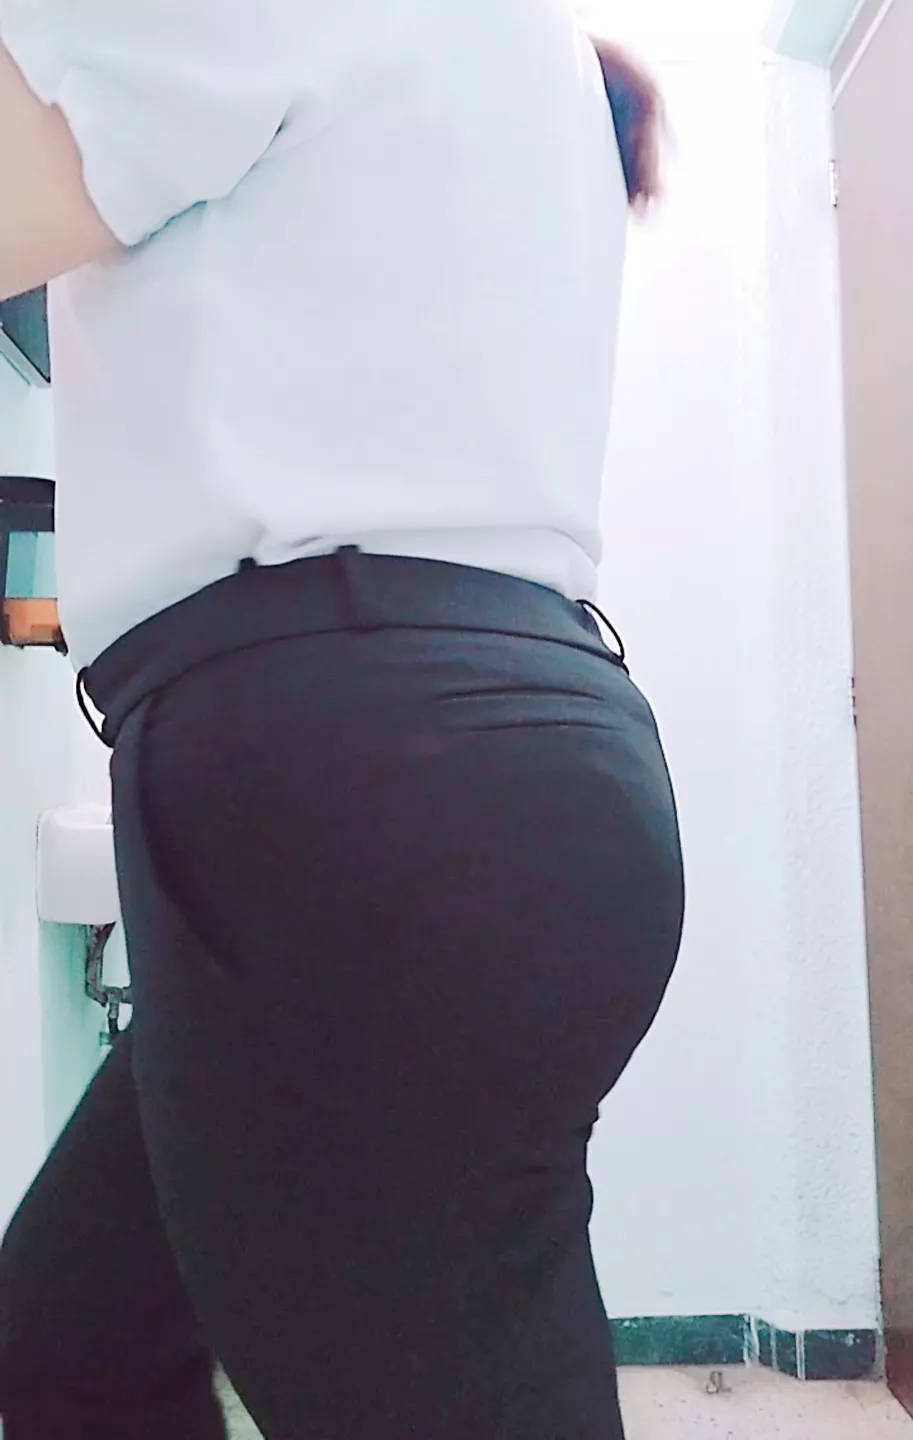 Secretary Removing Pants Porn - Sexy Mexican MILF Secretary with a Big Butt Takes off Her Uniform at the  Office and Shows Her Big Ass in a Sexy White Th | xHamster